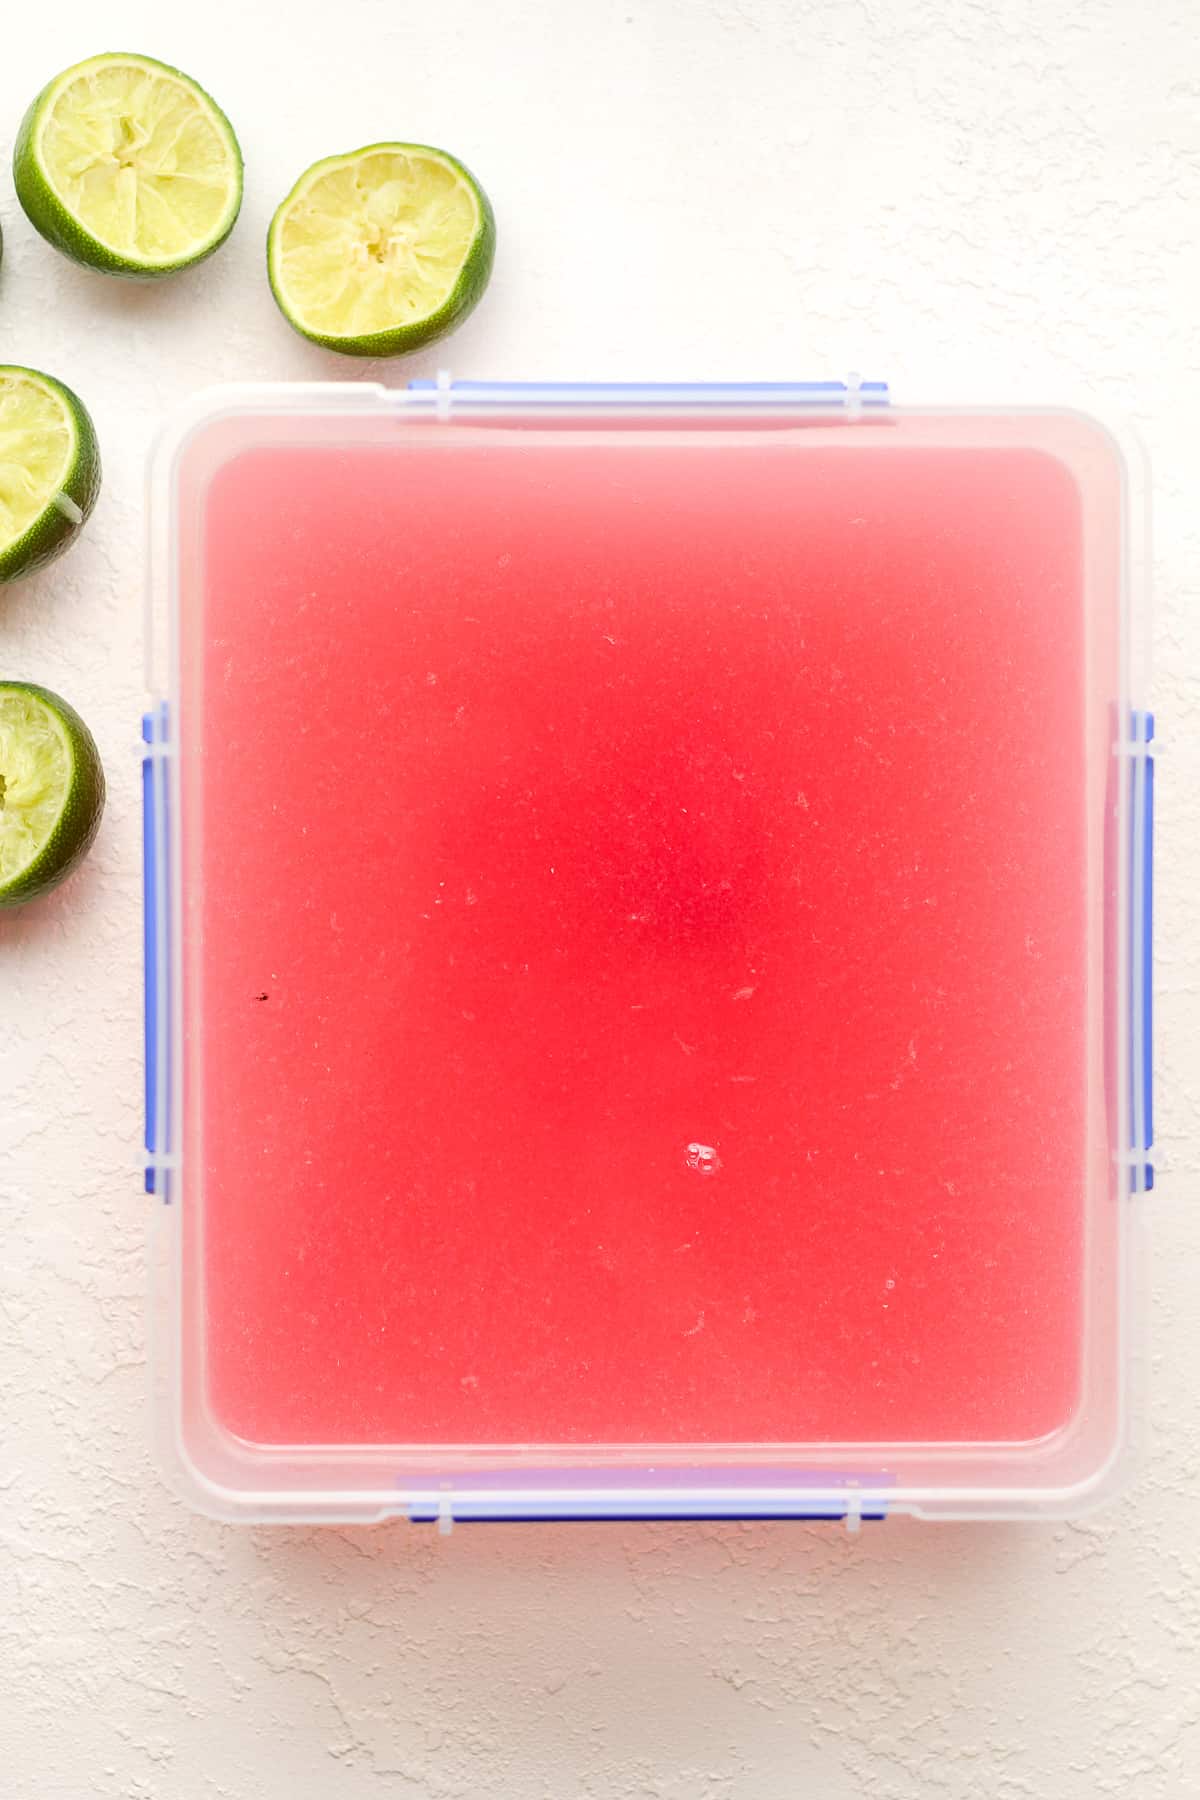 The liquid slush mixture in a rectangular container with limes next to it.